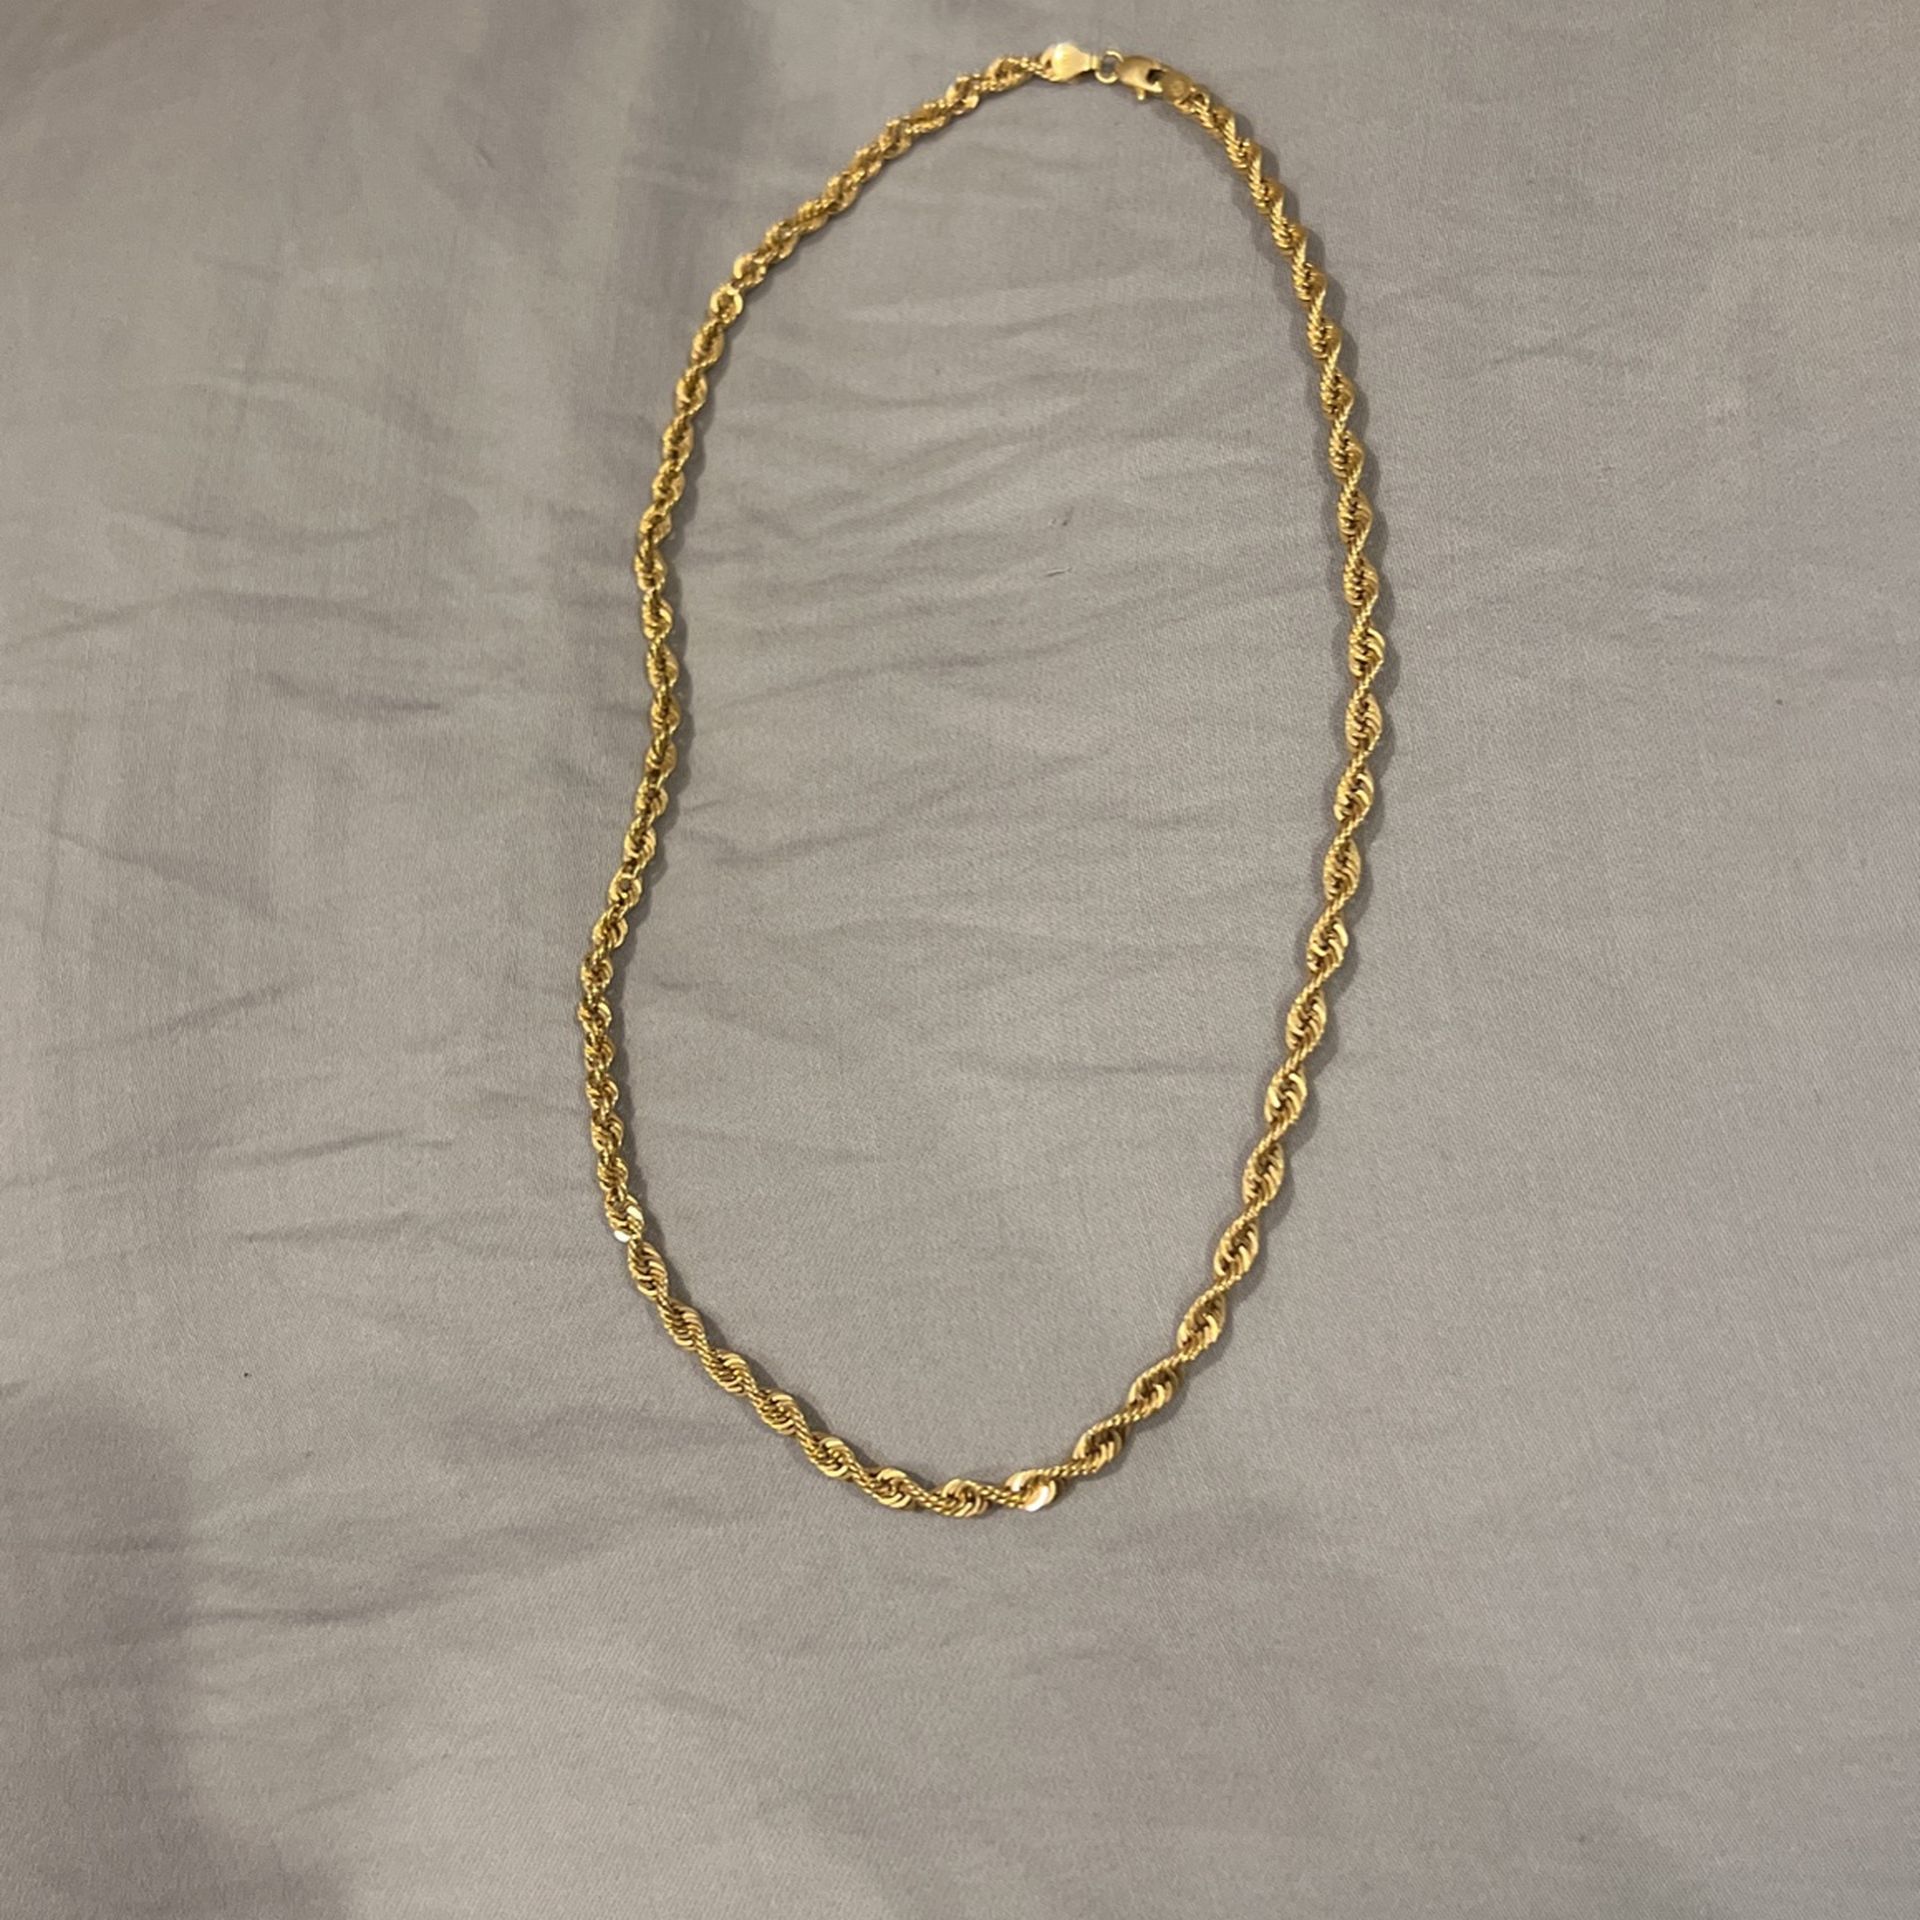 Gold rope chain 